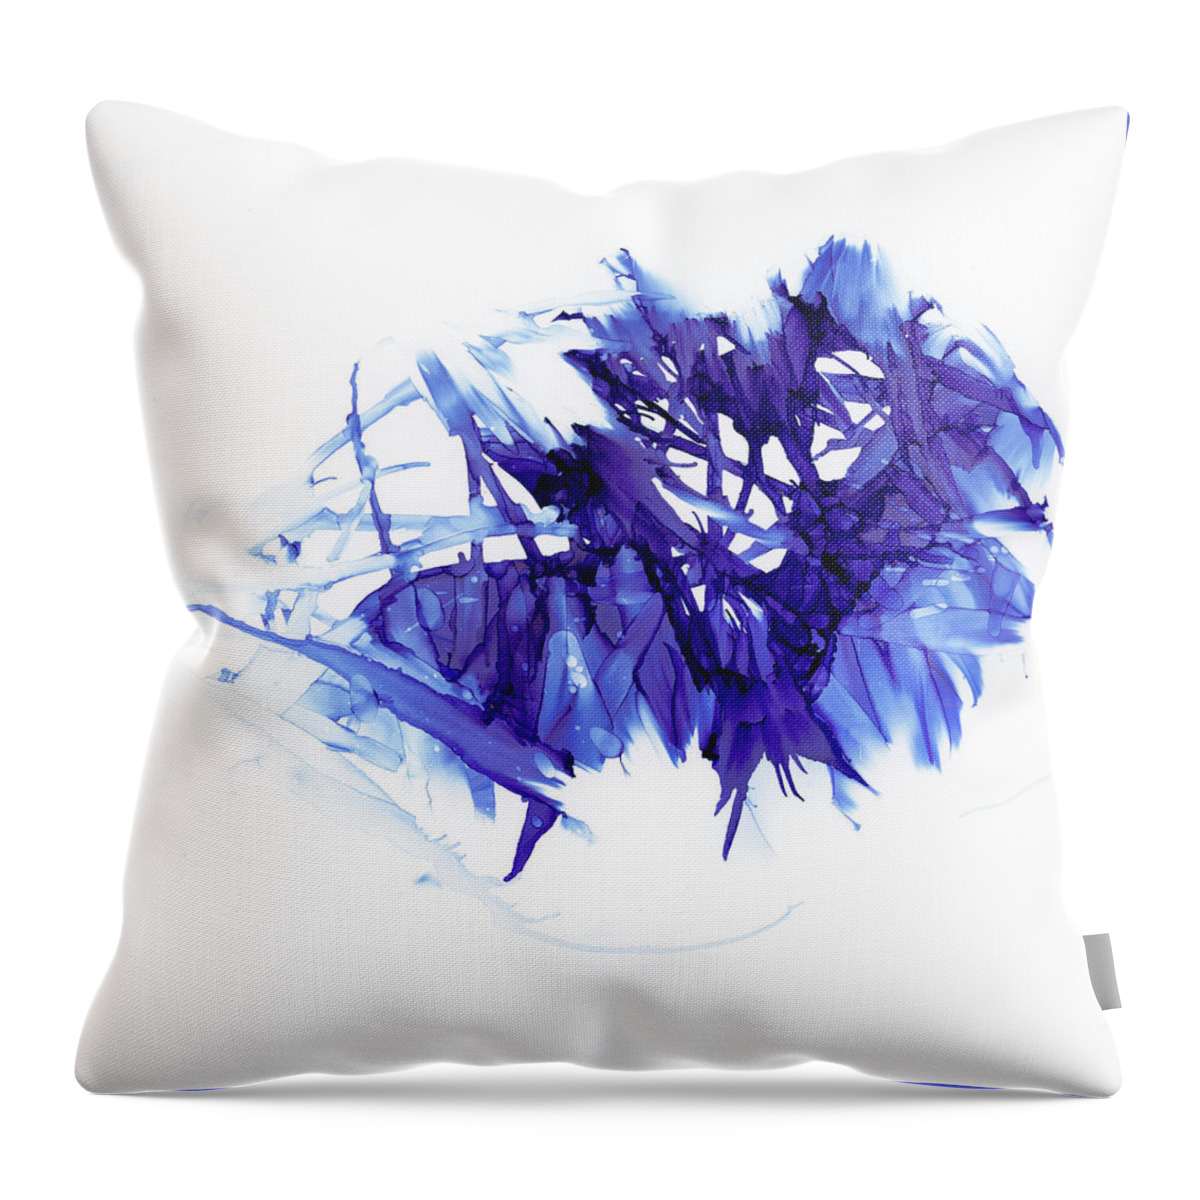 Bold Throw Pillow featuring the painting Icy by Christy Sawyer